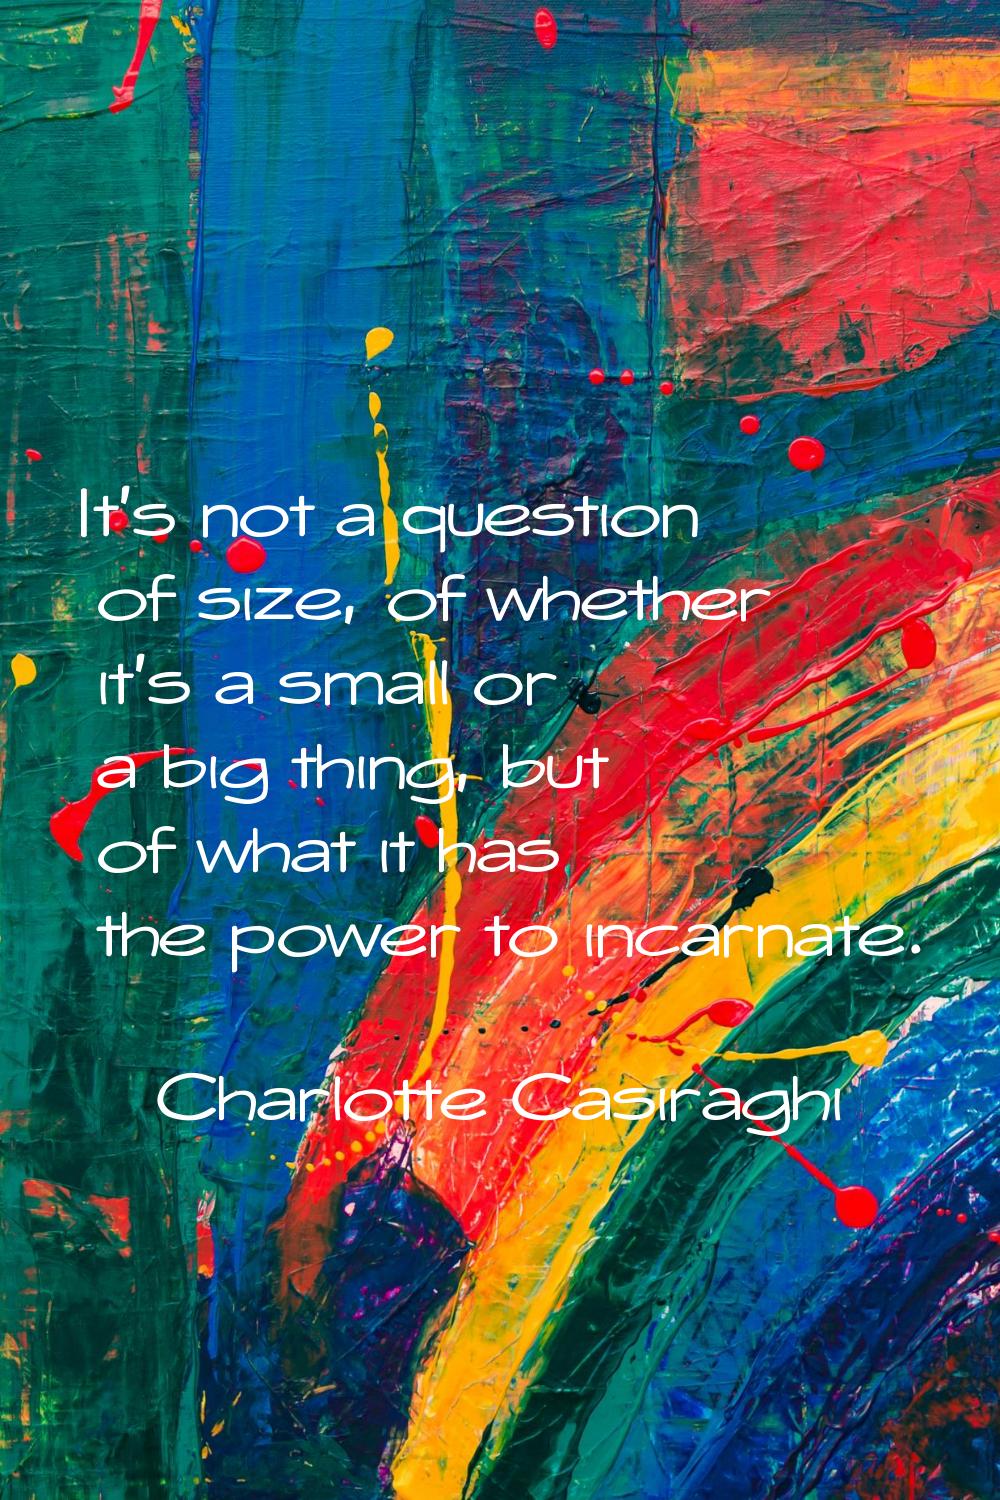 It's not a question of size, of whether it's a small or a big thing, but of what it has the power t